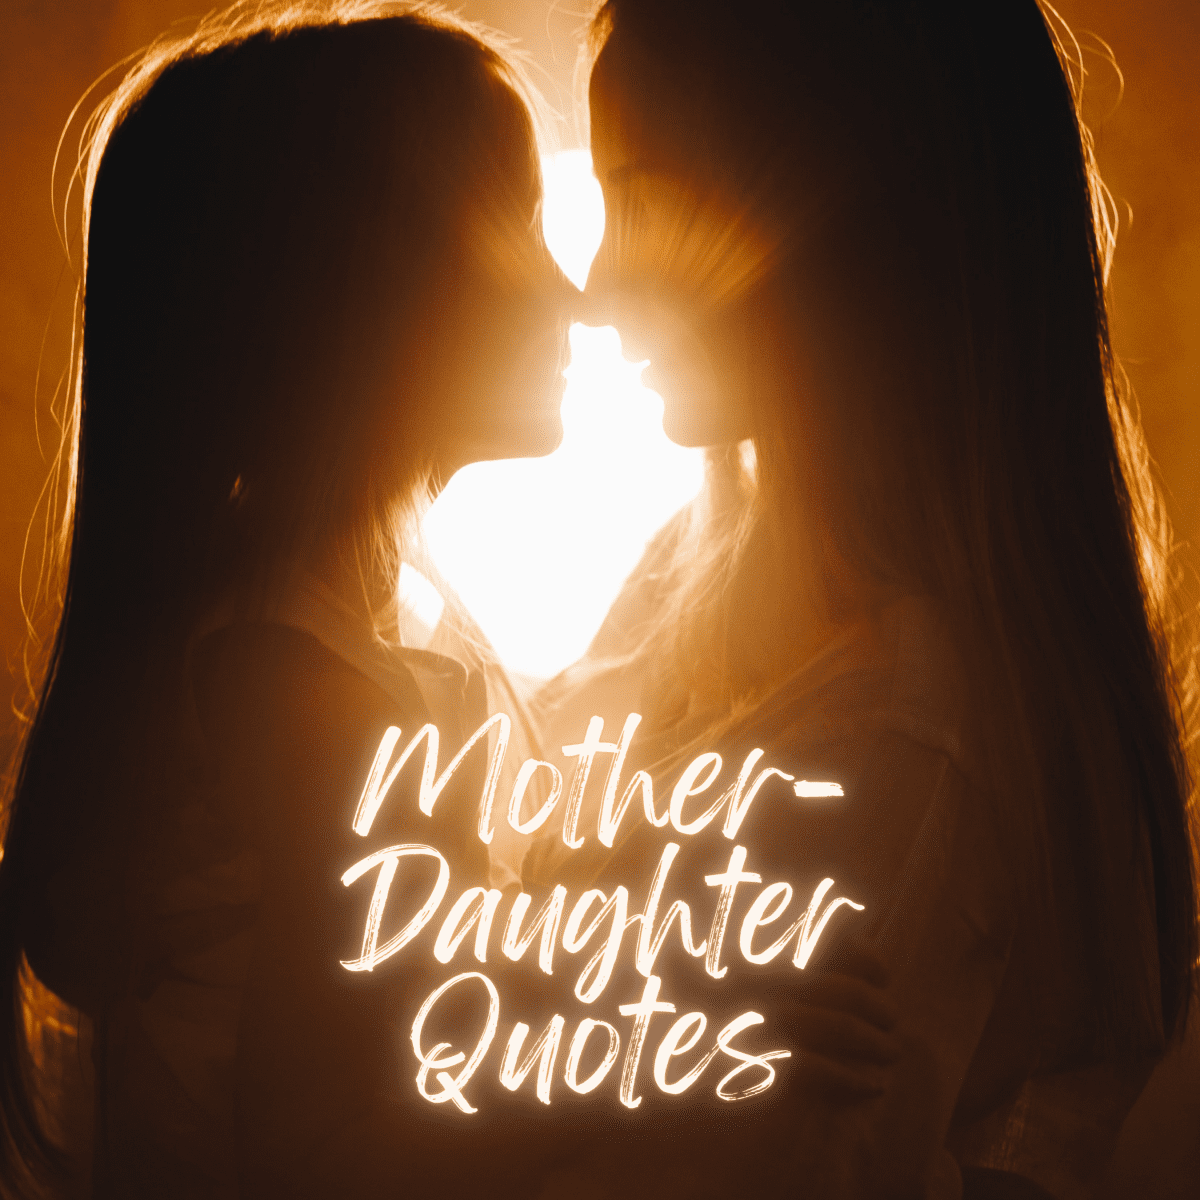 Quotes About Mother-Daughter Relationships - WeHaveKids